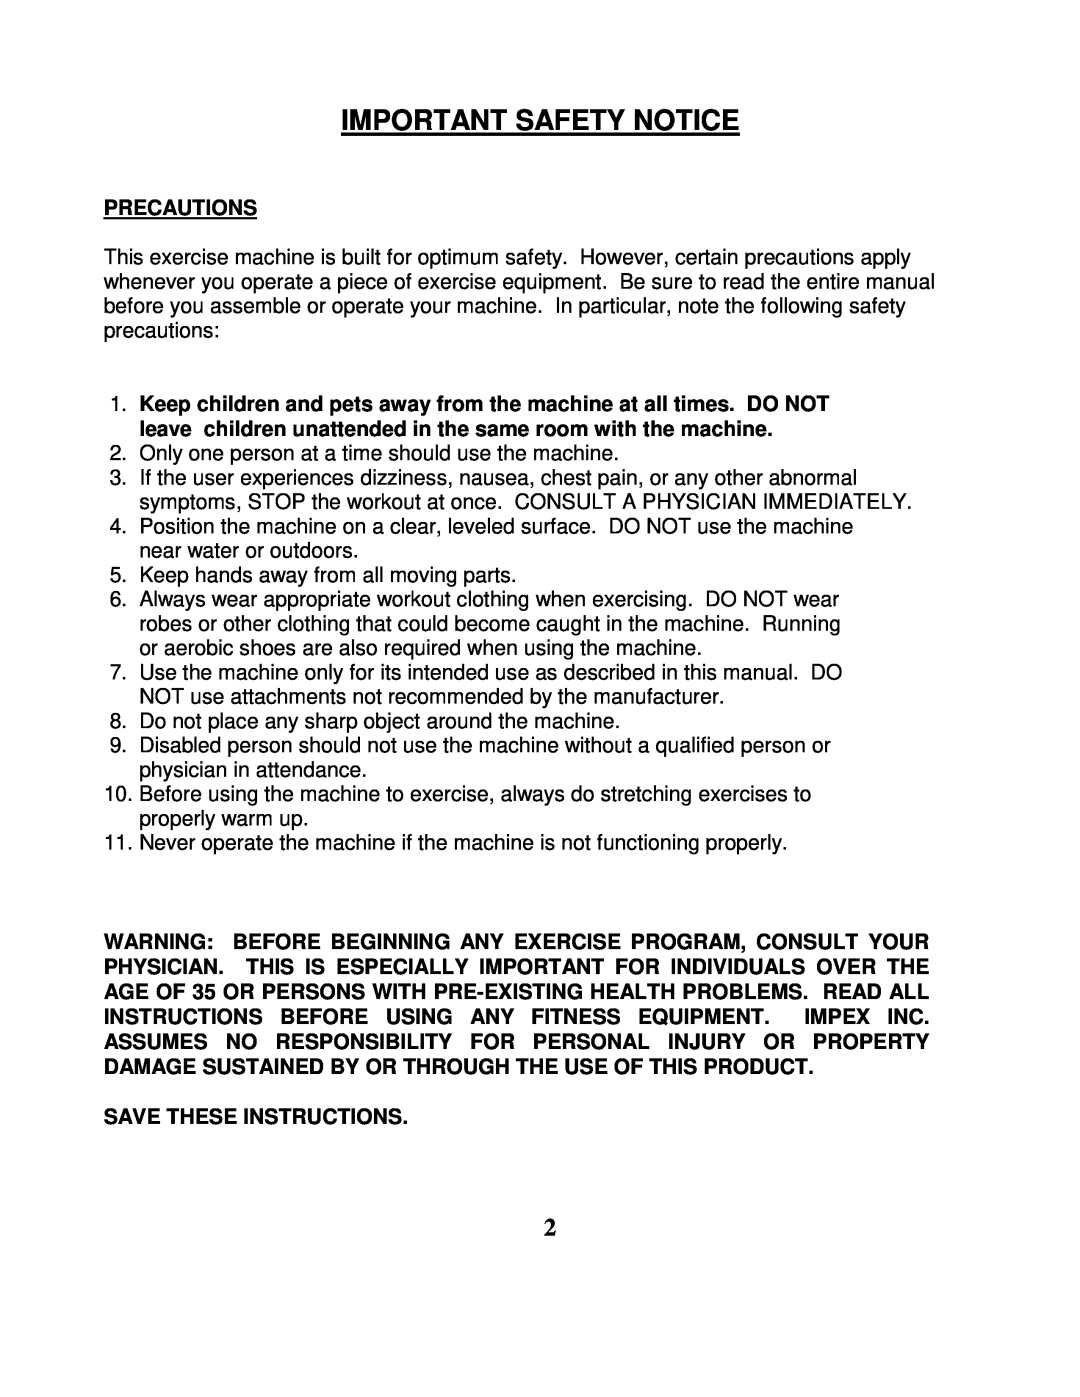 Impex SB 210 manual Important Safety Notice, Precautions, Save These Instructions 